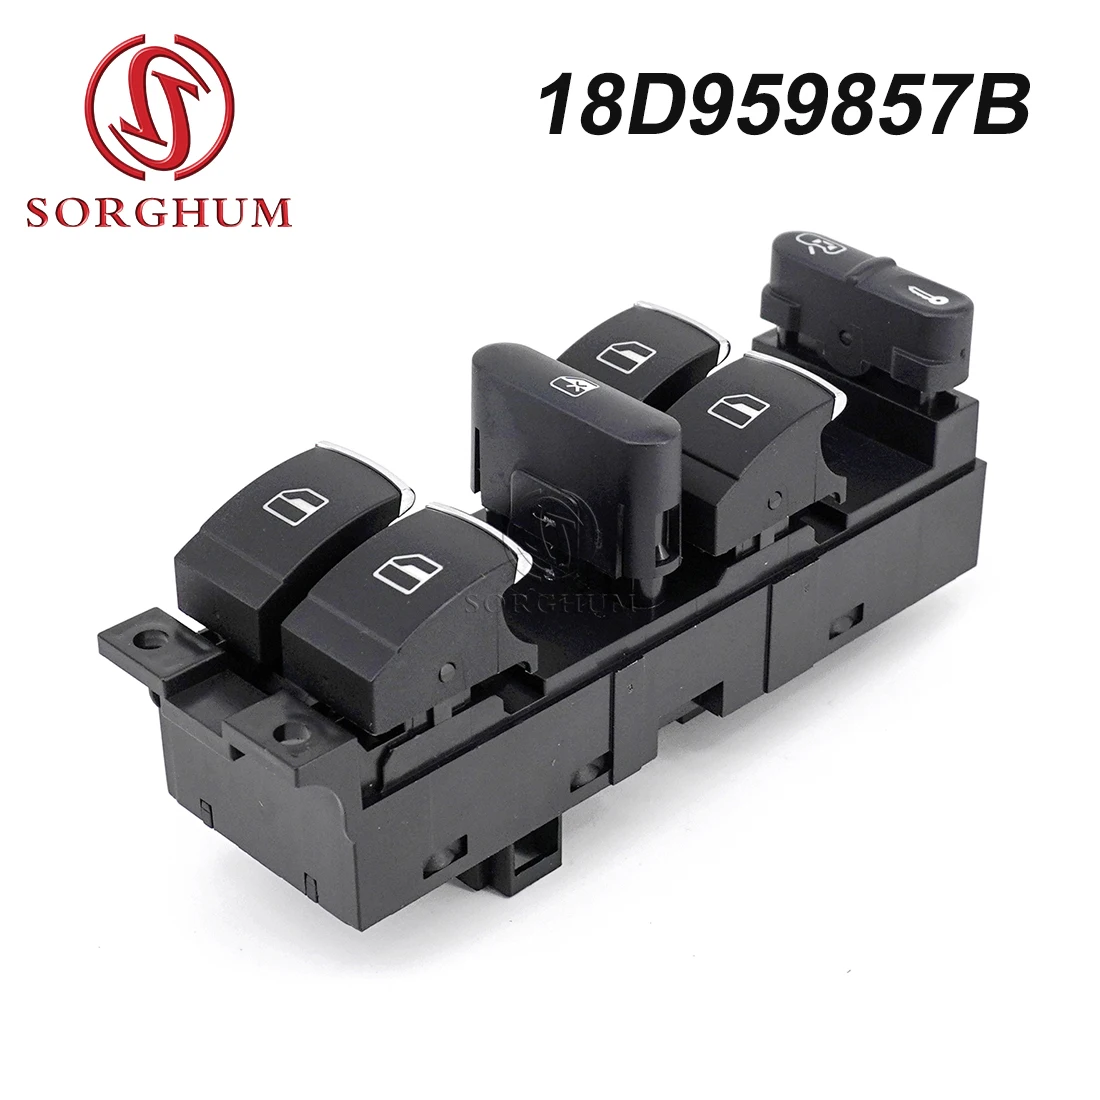 

Sorghum 18D 959 857B 18D959857B Electric Power Window Switch Master Glass Lifter Control for VW Lavida 2008 2009 2010 2011 2012